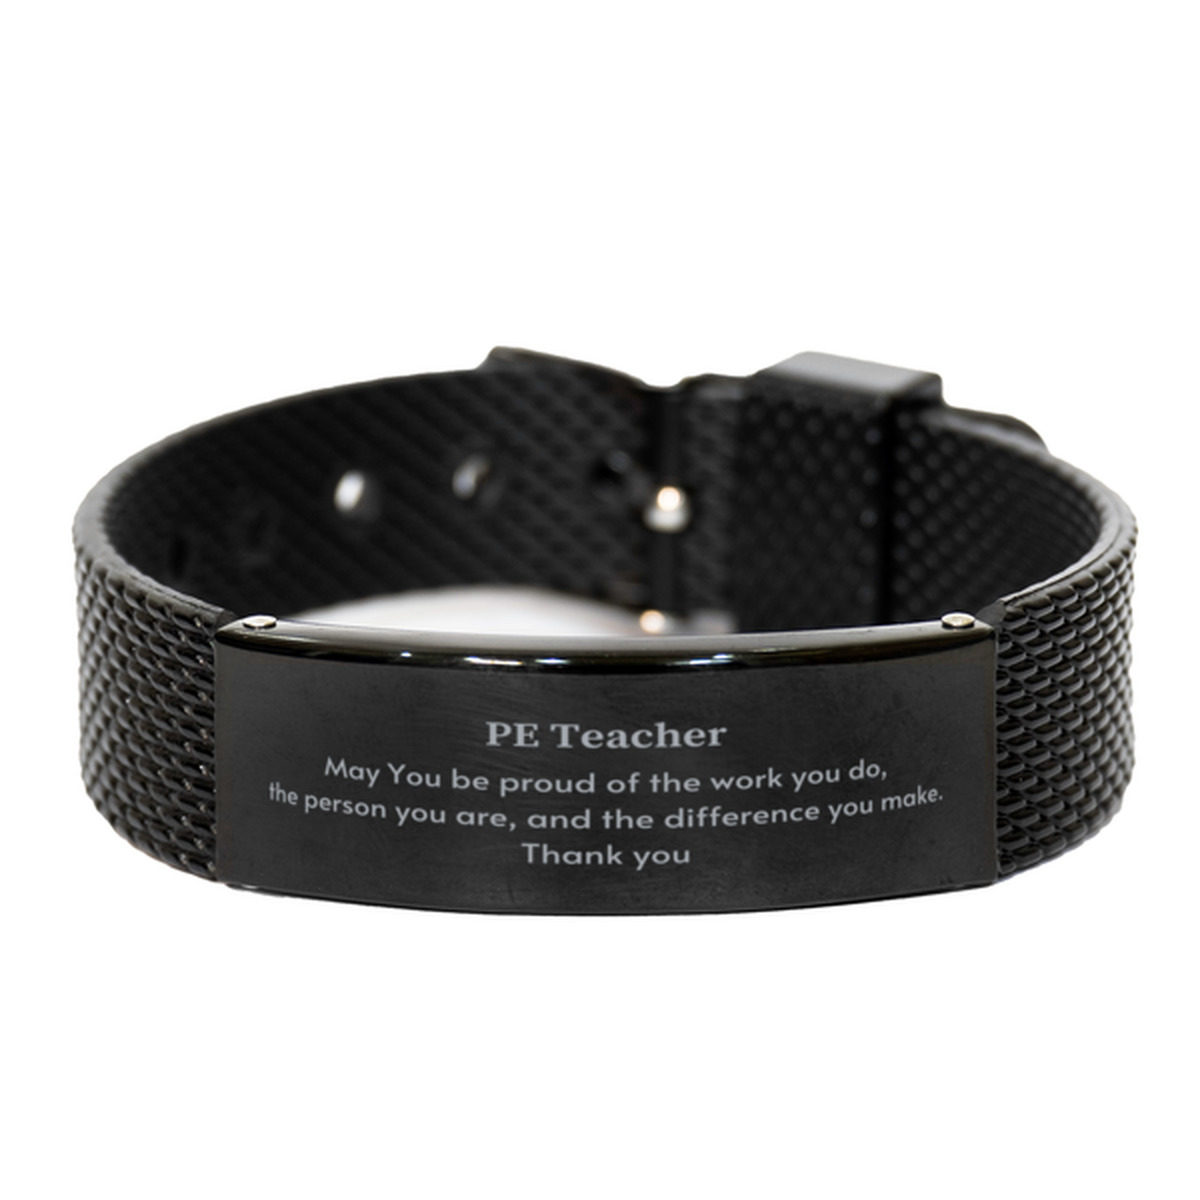 Heartwarming Black Shark Mesh Bracelet Retirement Coworkers Gifts for PE Teacher, PE Teacher May You be proud of the work you do, the person you are Gifts for Boss Men Women Friends